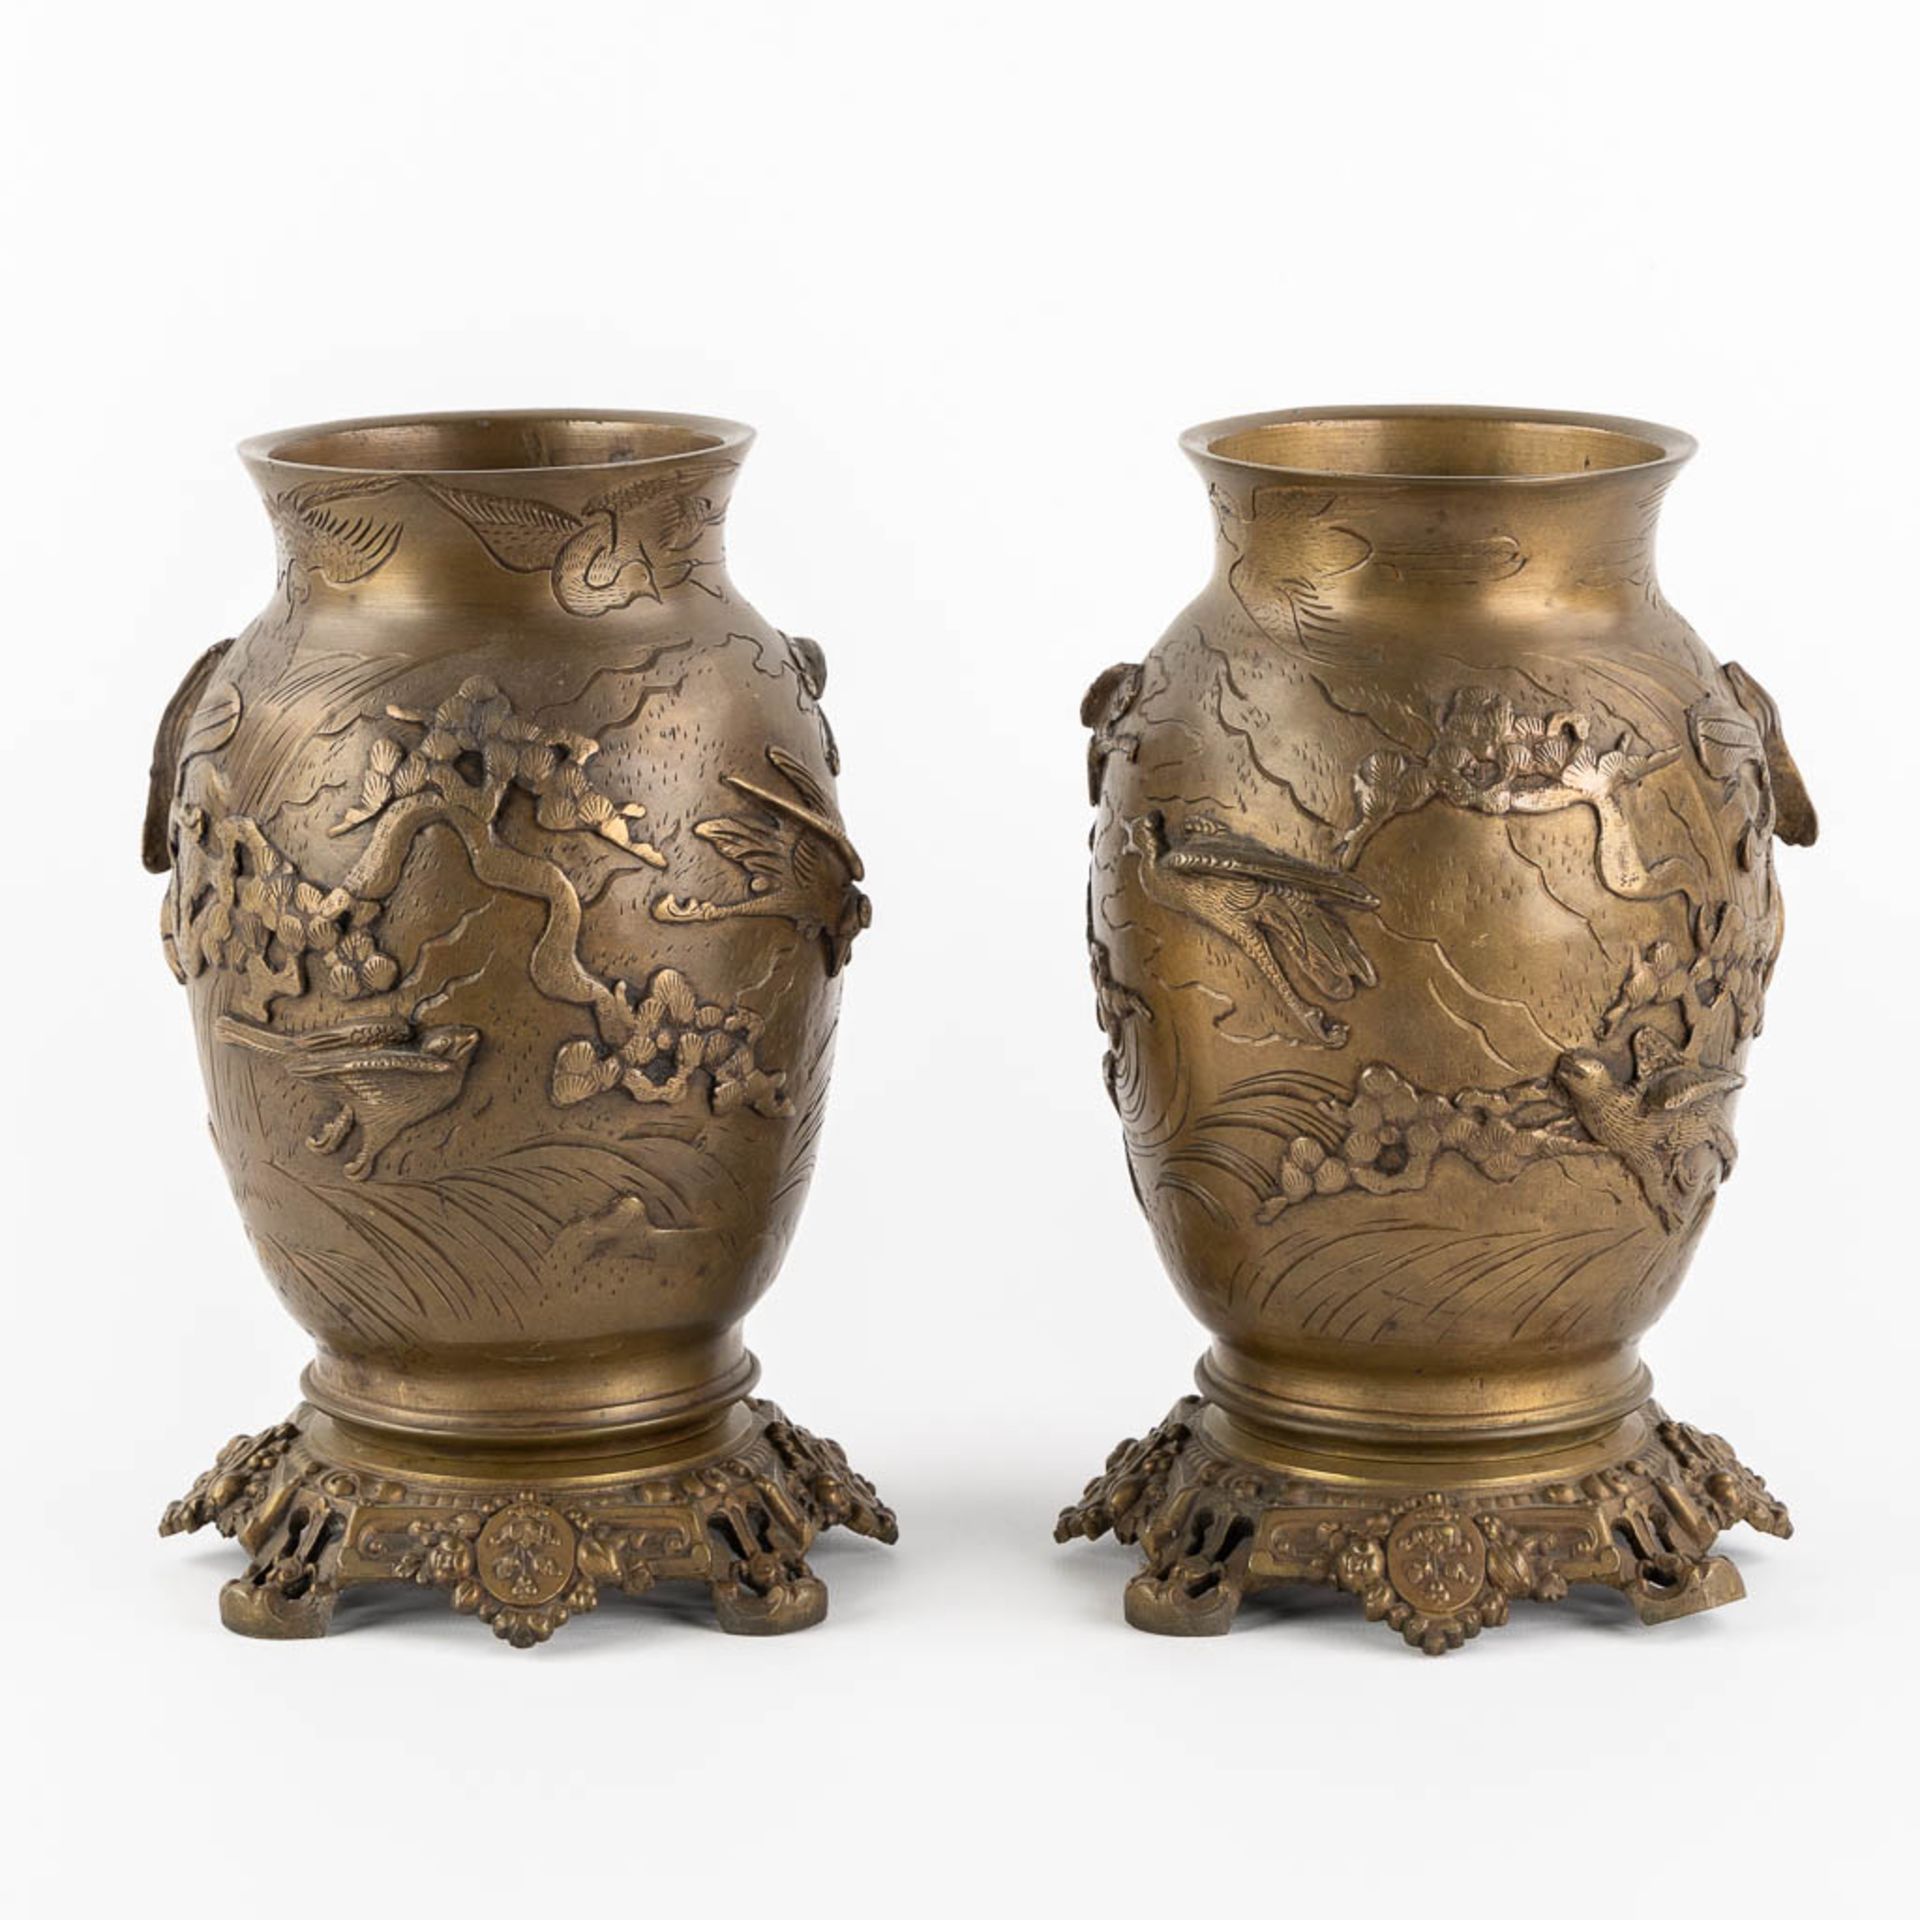 A pair of Oriental vases, depicting flying birds and trees. Patinated bronze. (H:27 x D:16 cm) - Bild 5 aus 16